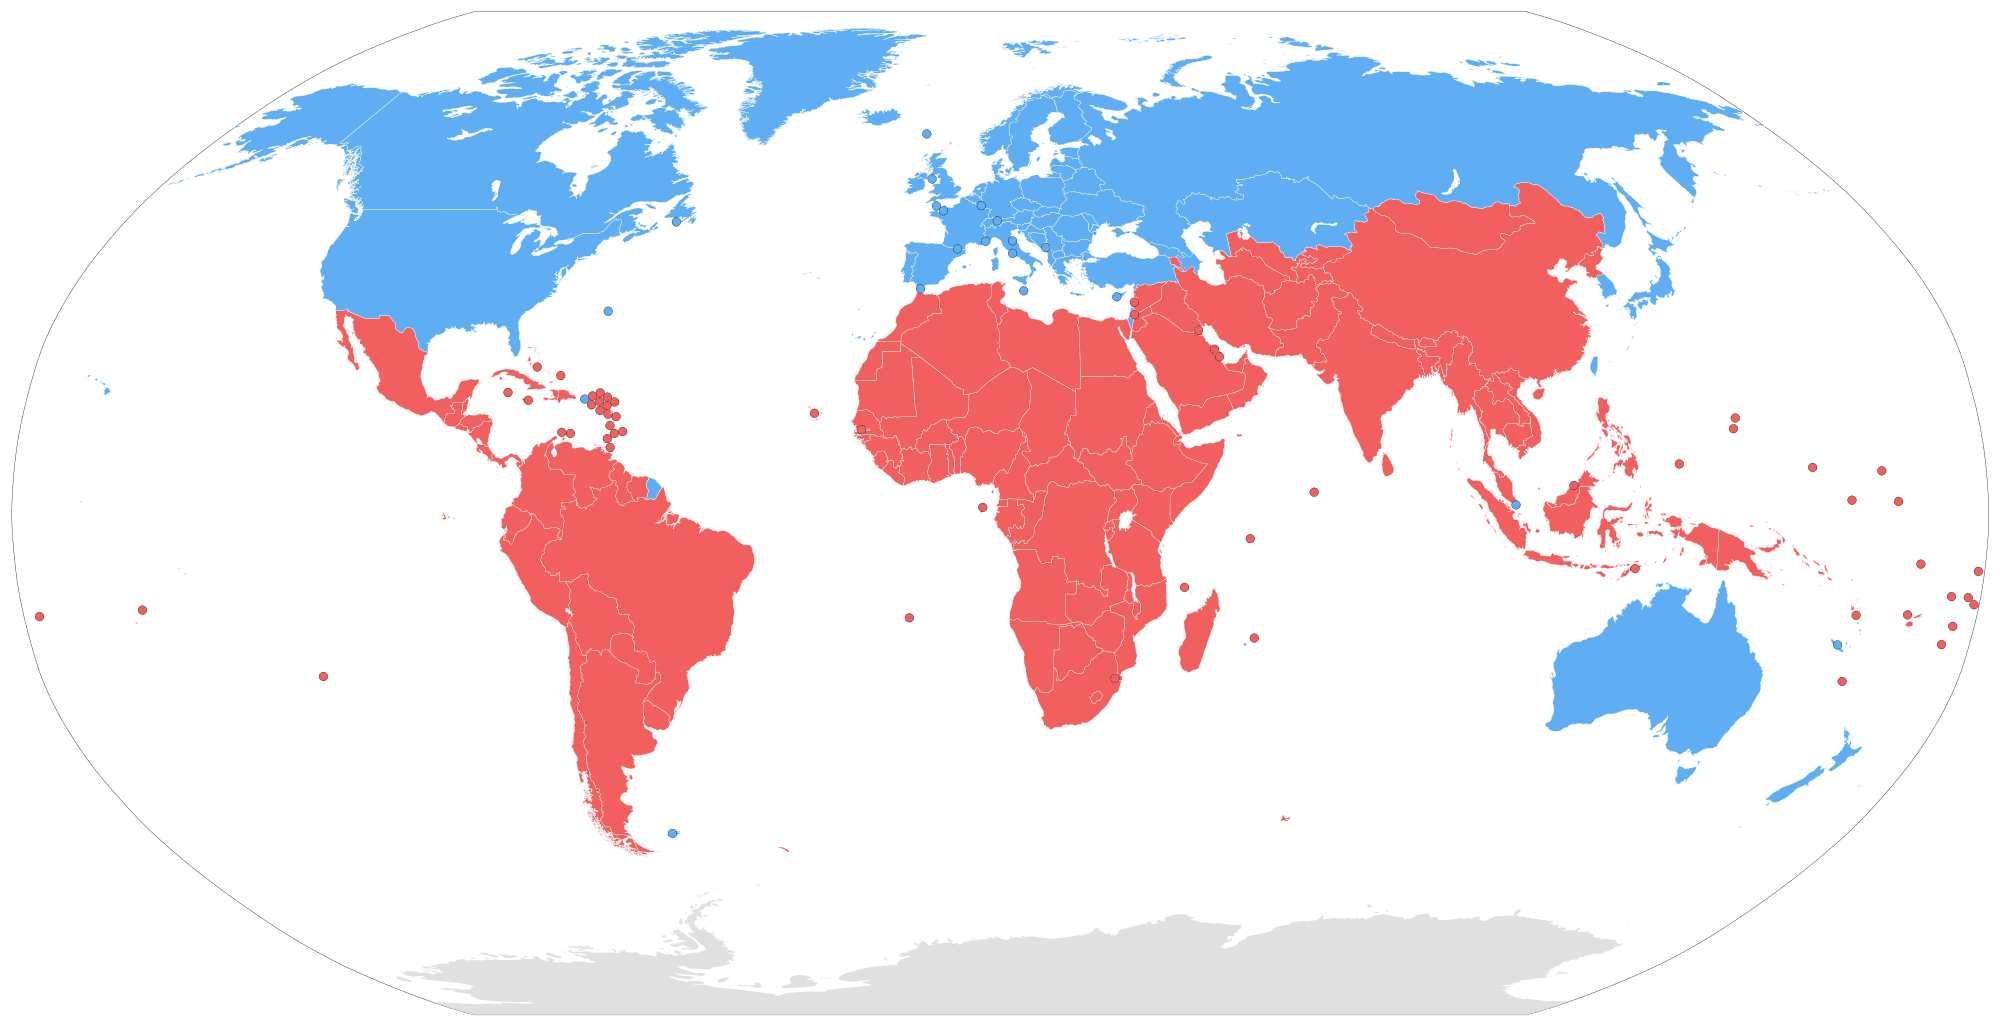 Map of the continents that distinguished north and south nations.